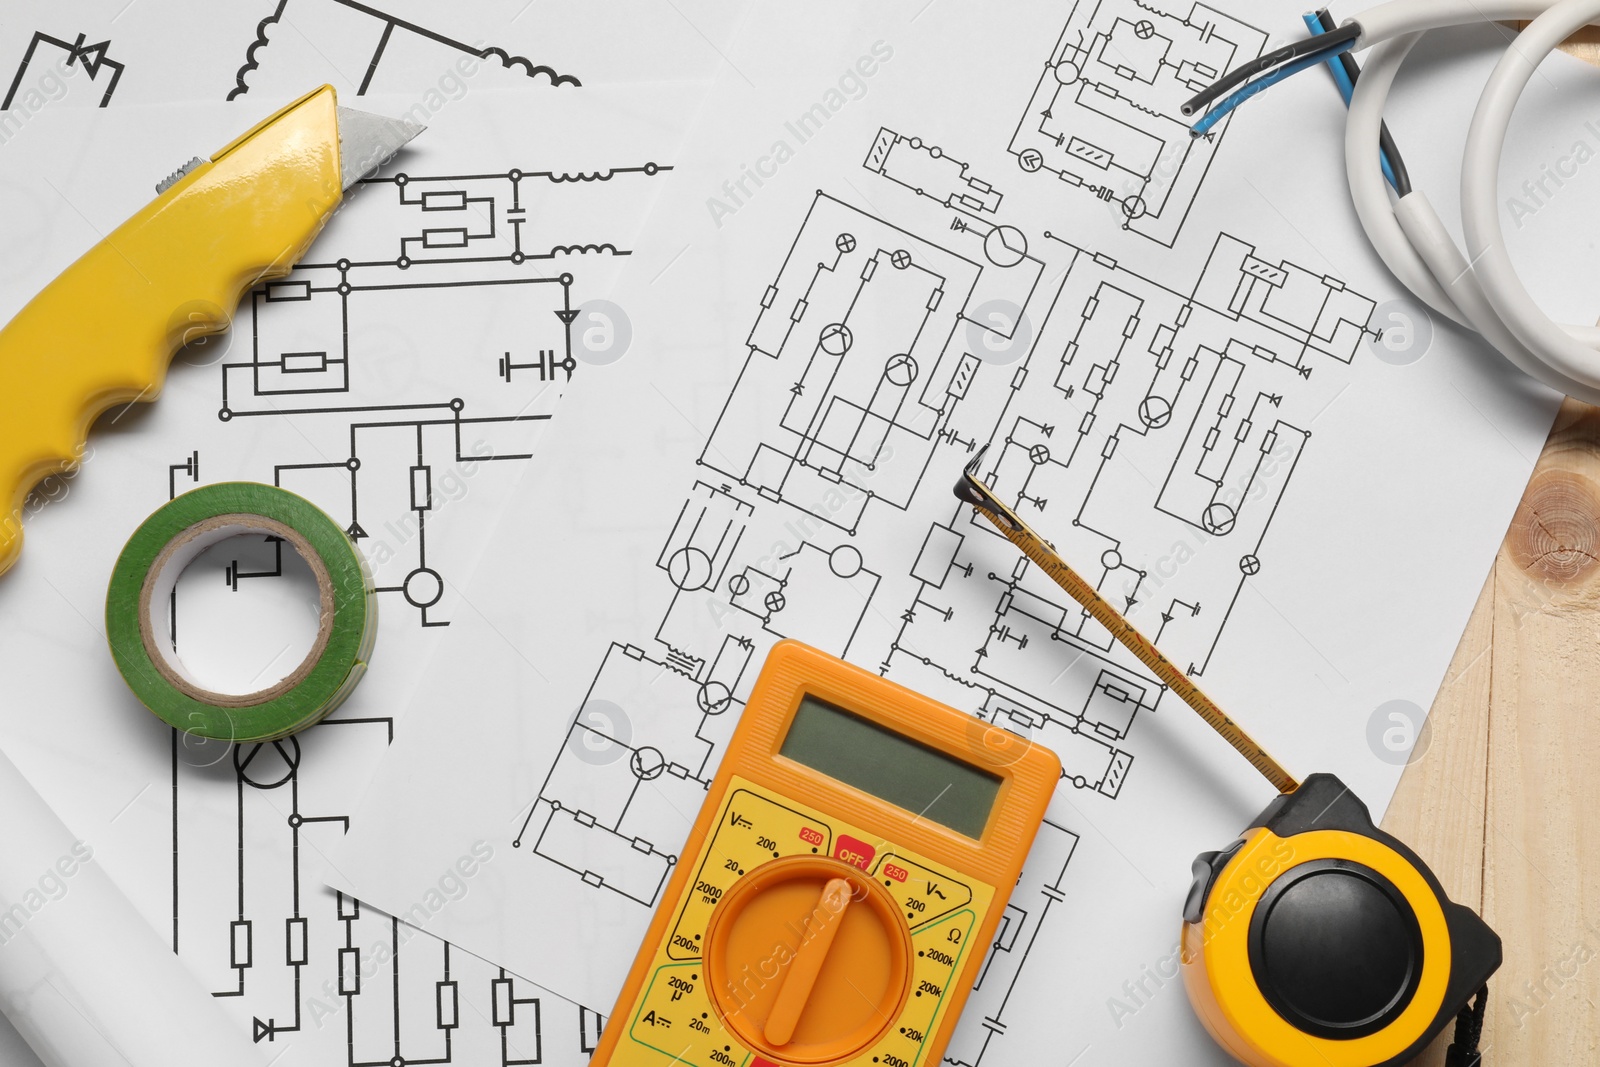 Photo of Wiring diagrams, wires and digital multimeter on wooden table, top view